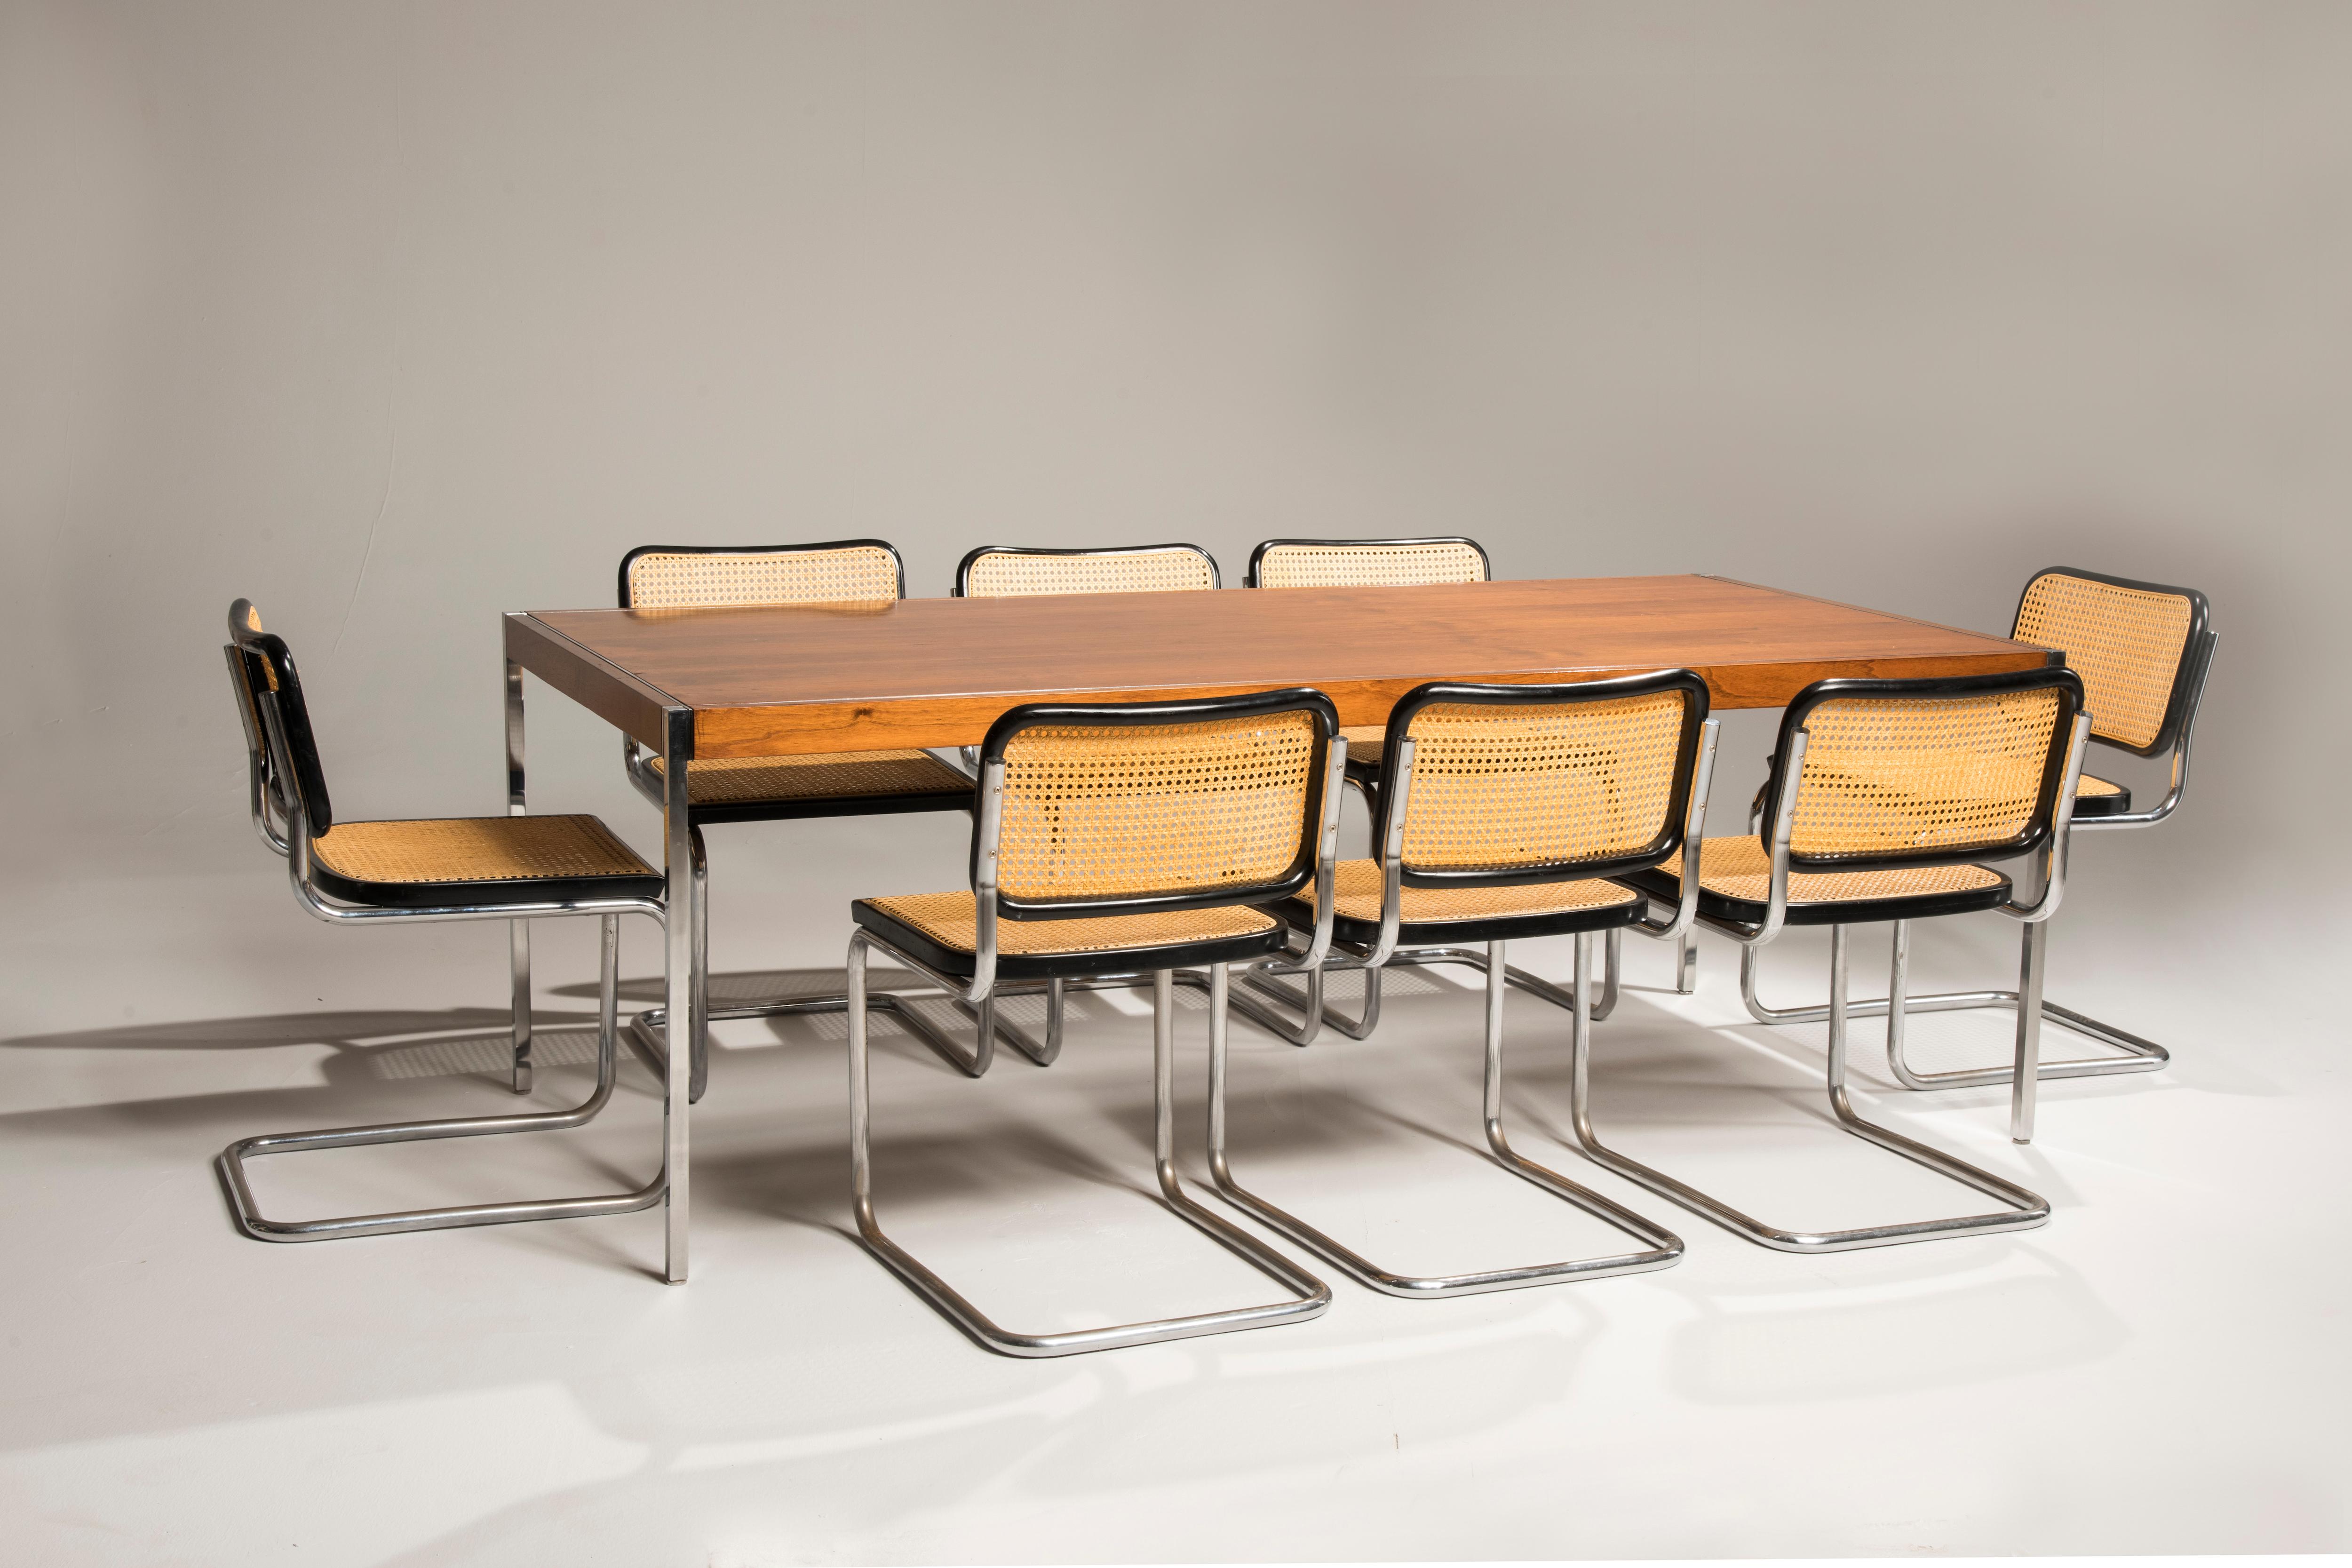 Bauhaus Marcel Breuer Cesca Chairs for Knoll Production, 18 Chairs Available 2